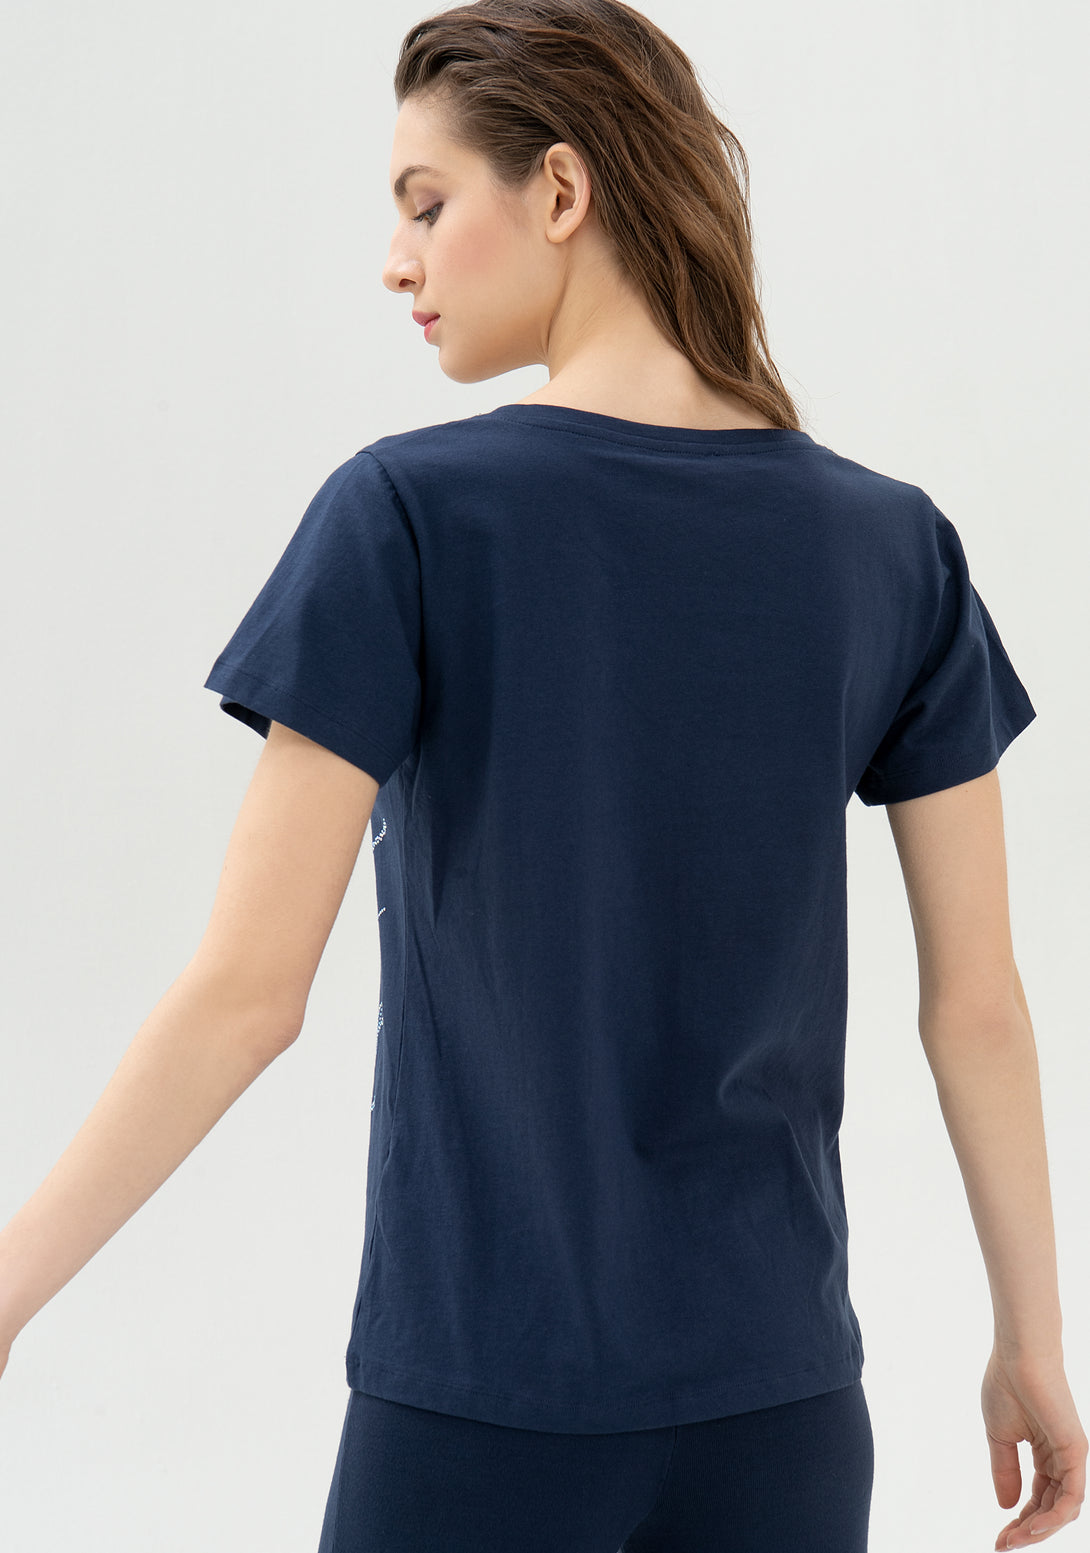 T-shirt regular fit made in cotton jersey with all-over logo made with strasses